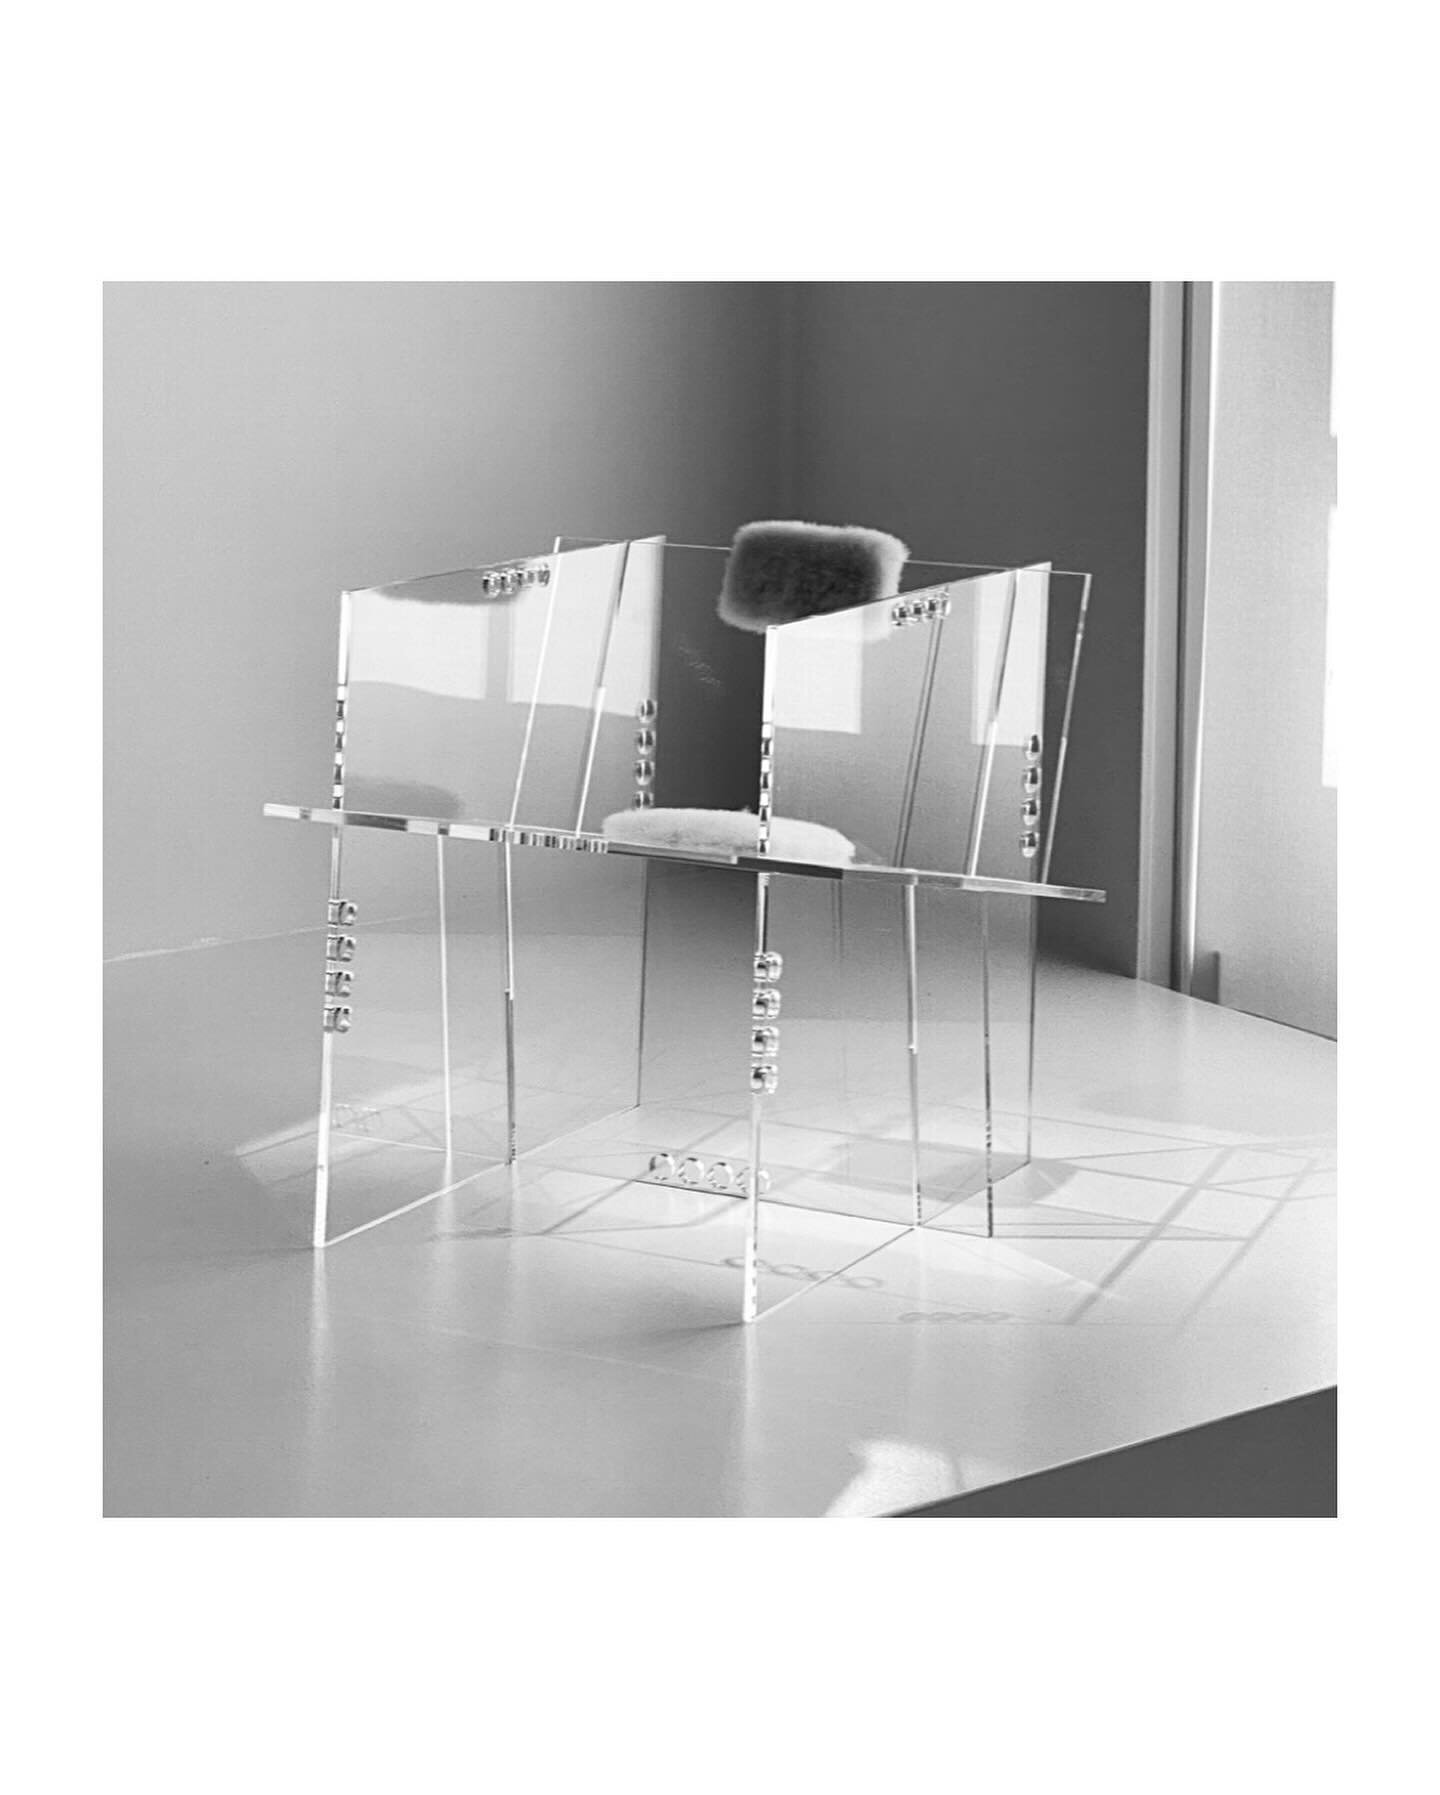 FURNITURE DESIGN - Waiting For Ideas x MAISON F&Eacute;VRIER

&laquo;&nbsp;Floating&nbsp;&raquo; is an armchair made out of five panels of acrylic glass and two feather cushion.

As each panel seamlessly interlocks, a captivating dance of light and r